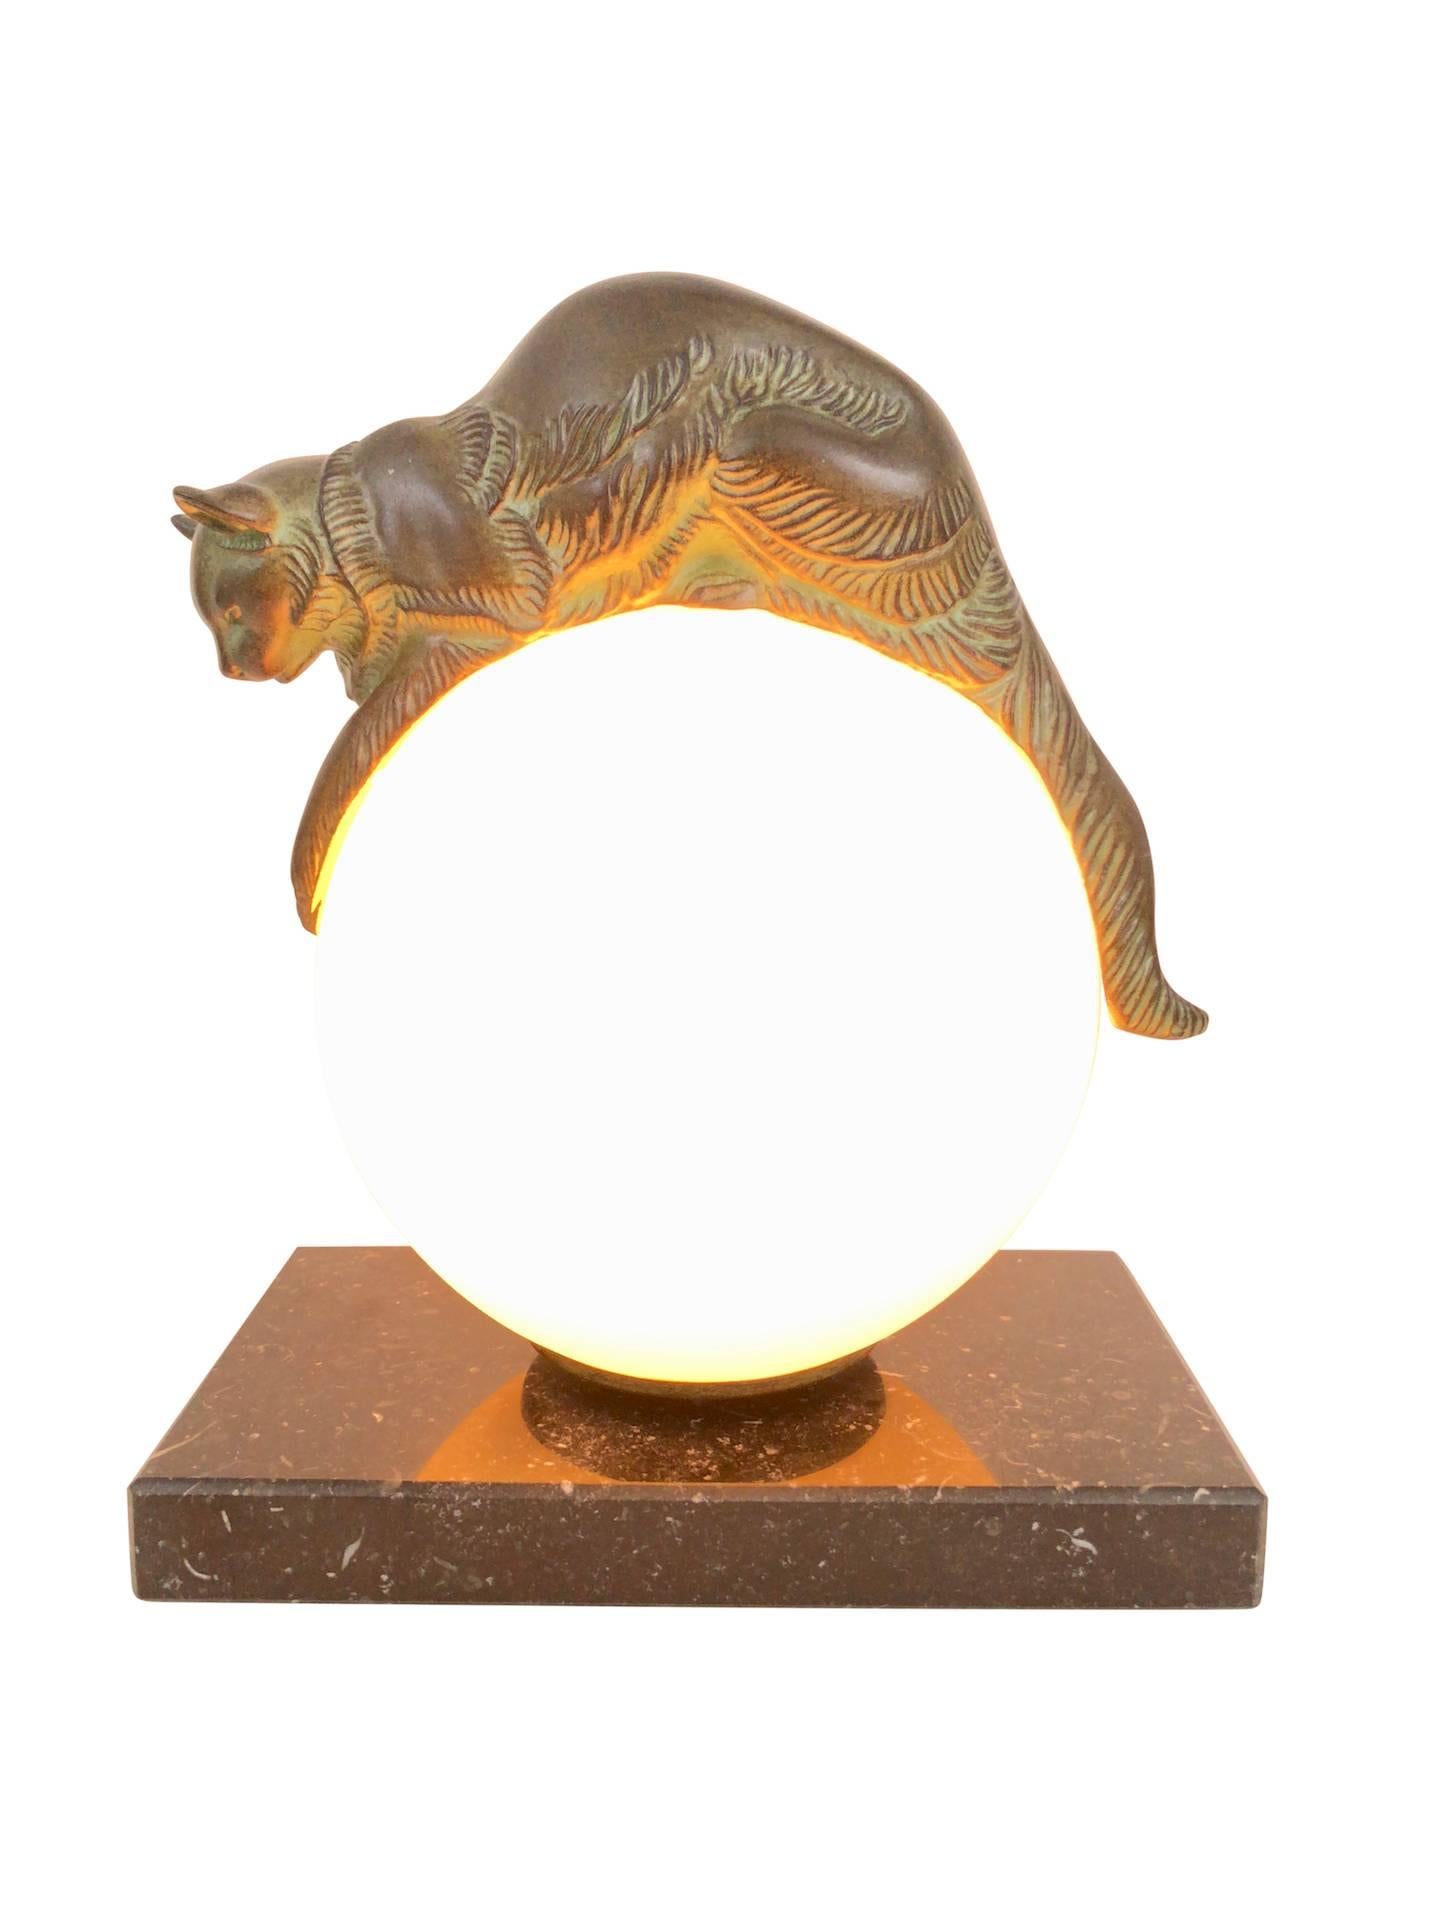 Marble Table Lamp, Equilibre, Cat on Glass Ball by Gaillard, Original Max Le Verrier